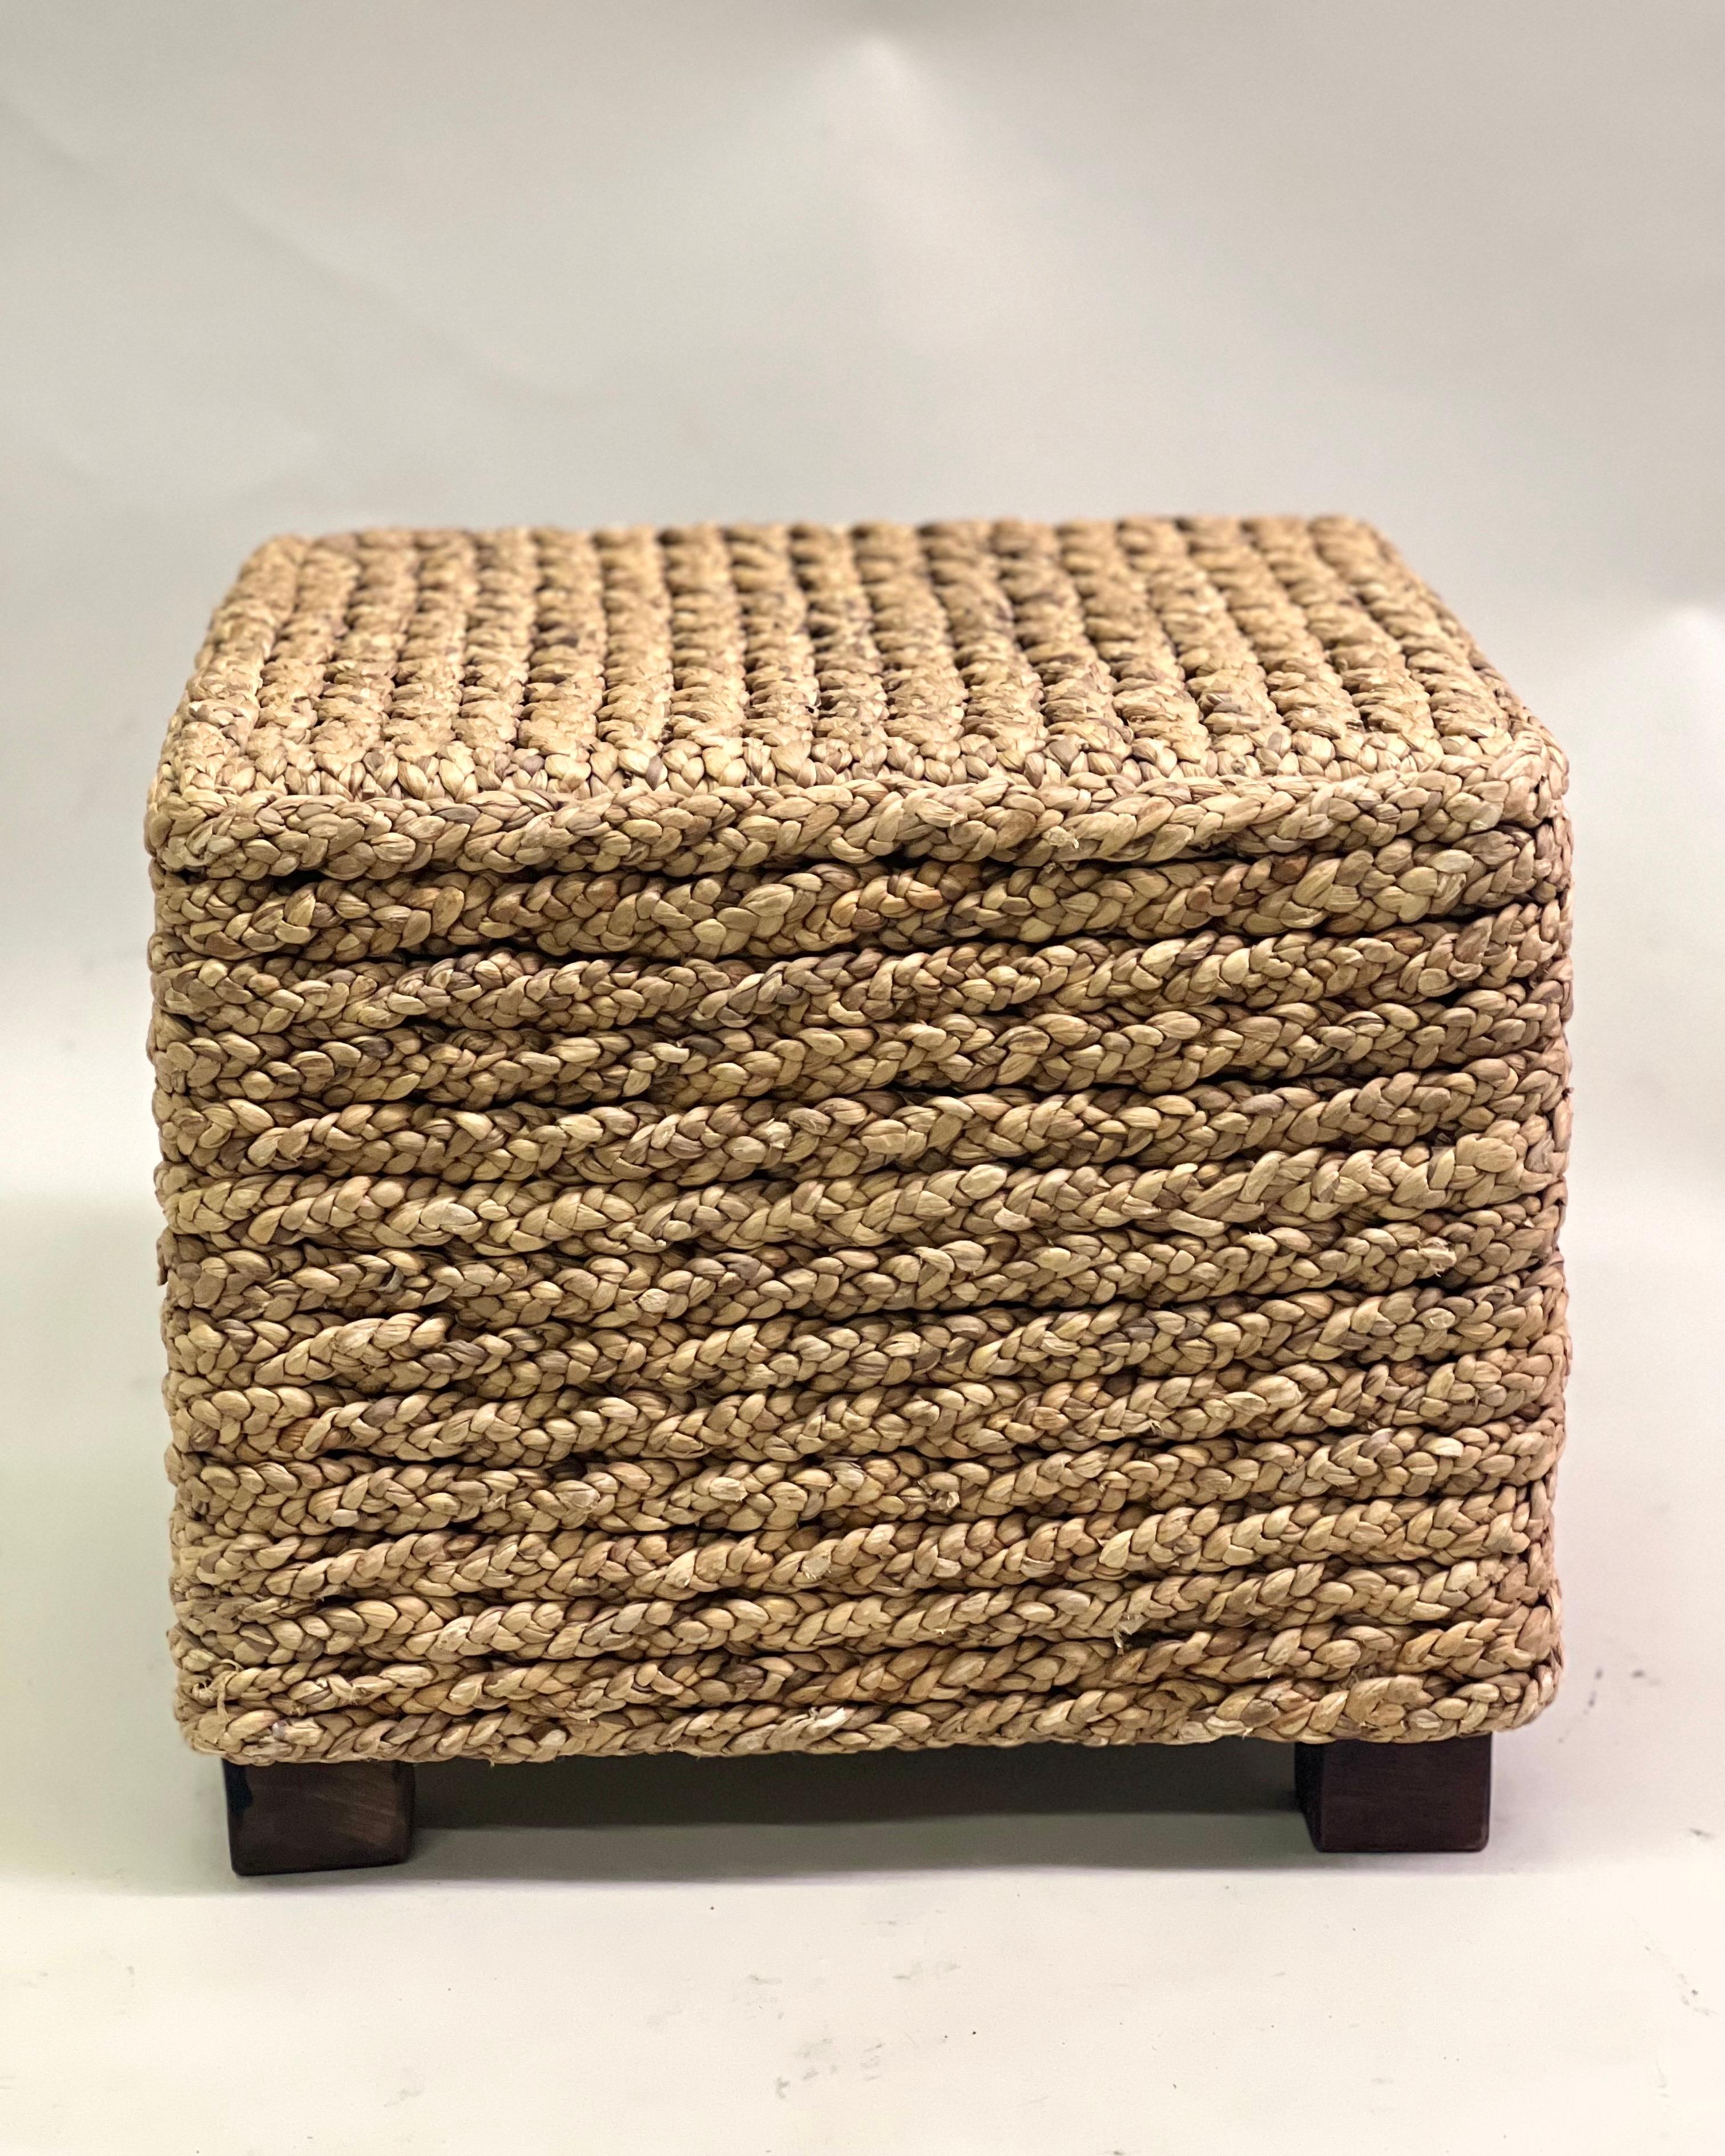 Elegant, Timeless French Mid-Century Modern Stool, Ottoman or Bench Hand-crafted and hand-knotted in Rope by Adrien Audoux and Frida Minet, France, circa 1960-1970. This modern craftsman piece is carefully designed and constructed with rhythmic,